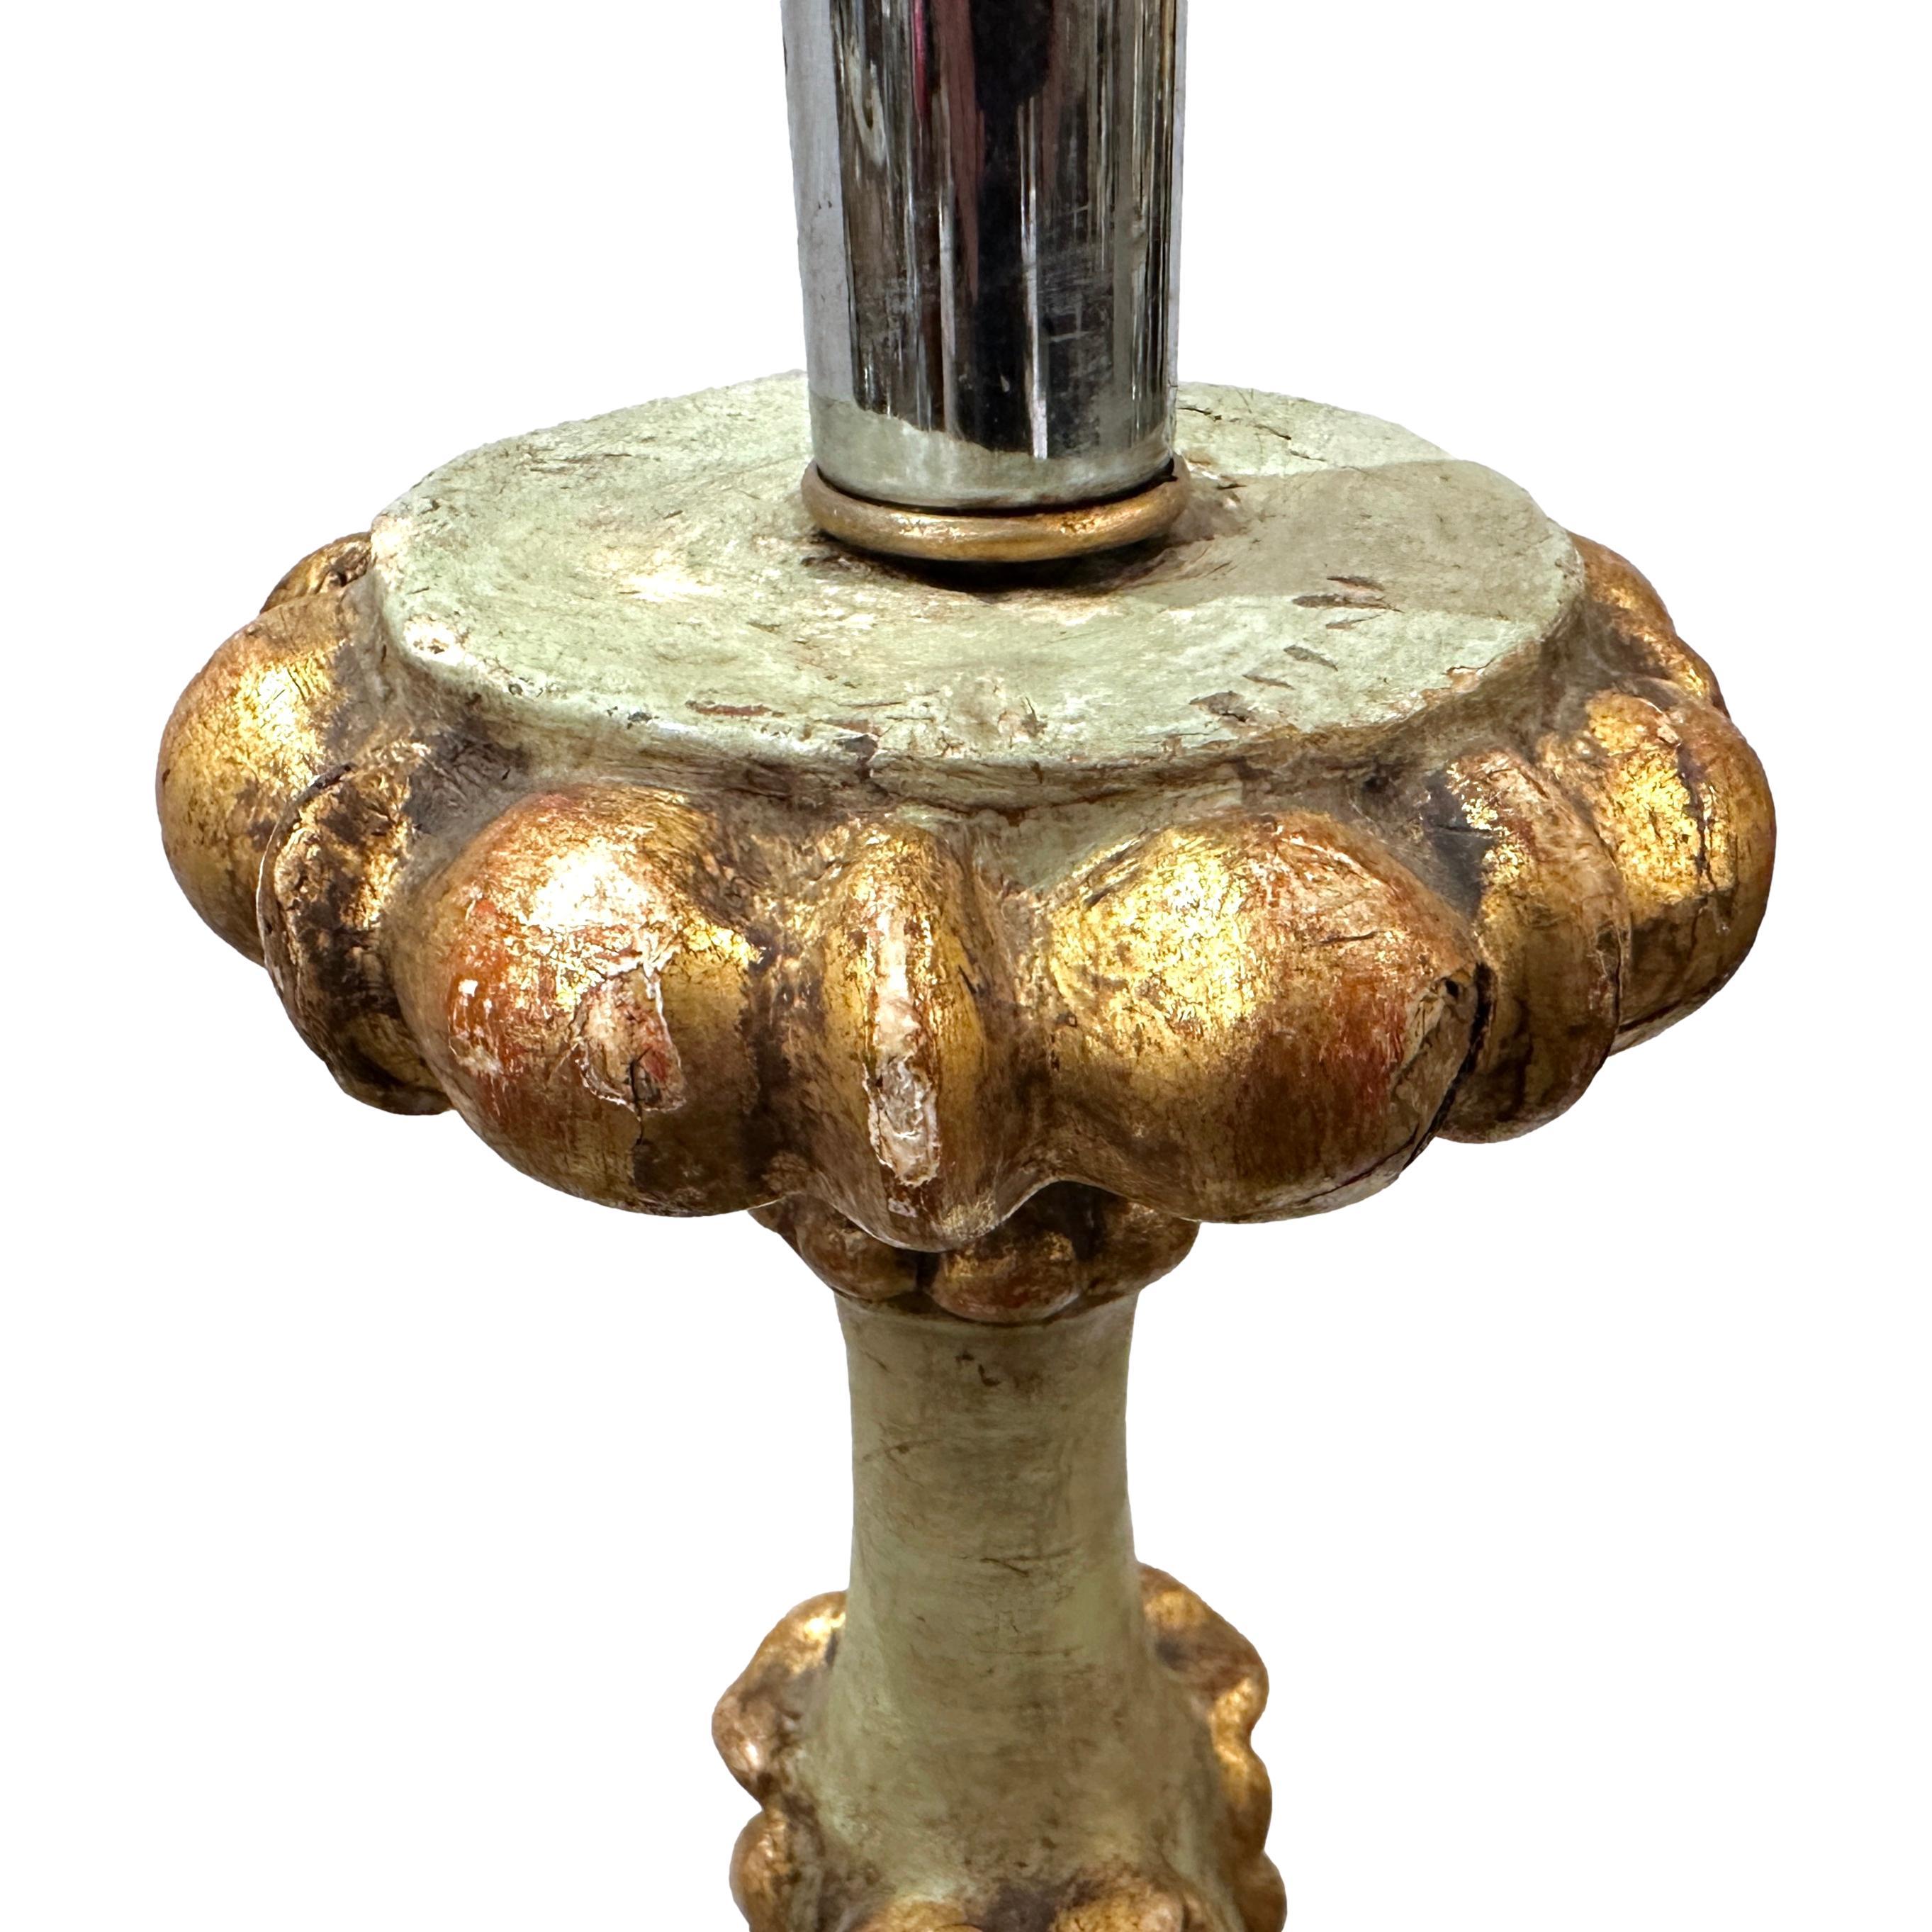 A pair of circa 1920's Italian carved and gilt wood candlesticks mounted as lamps.

Measurements:
Height of body: 24